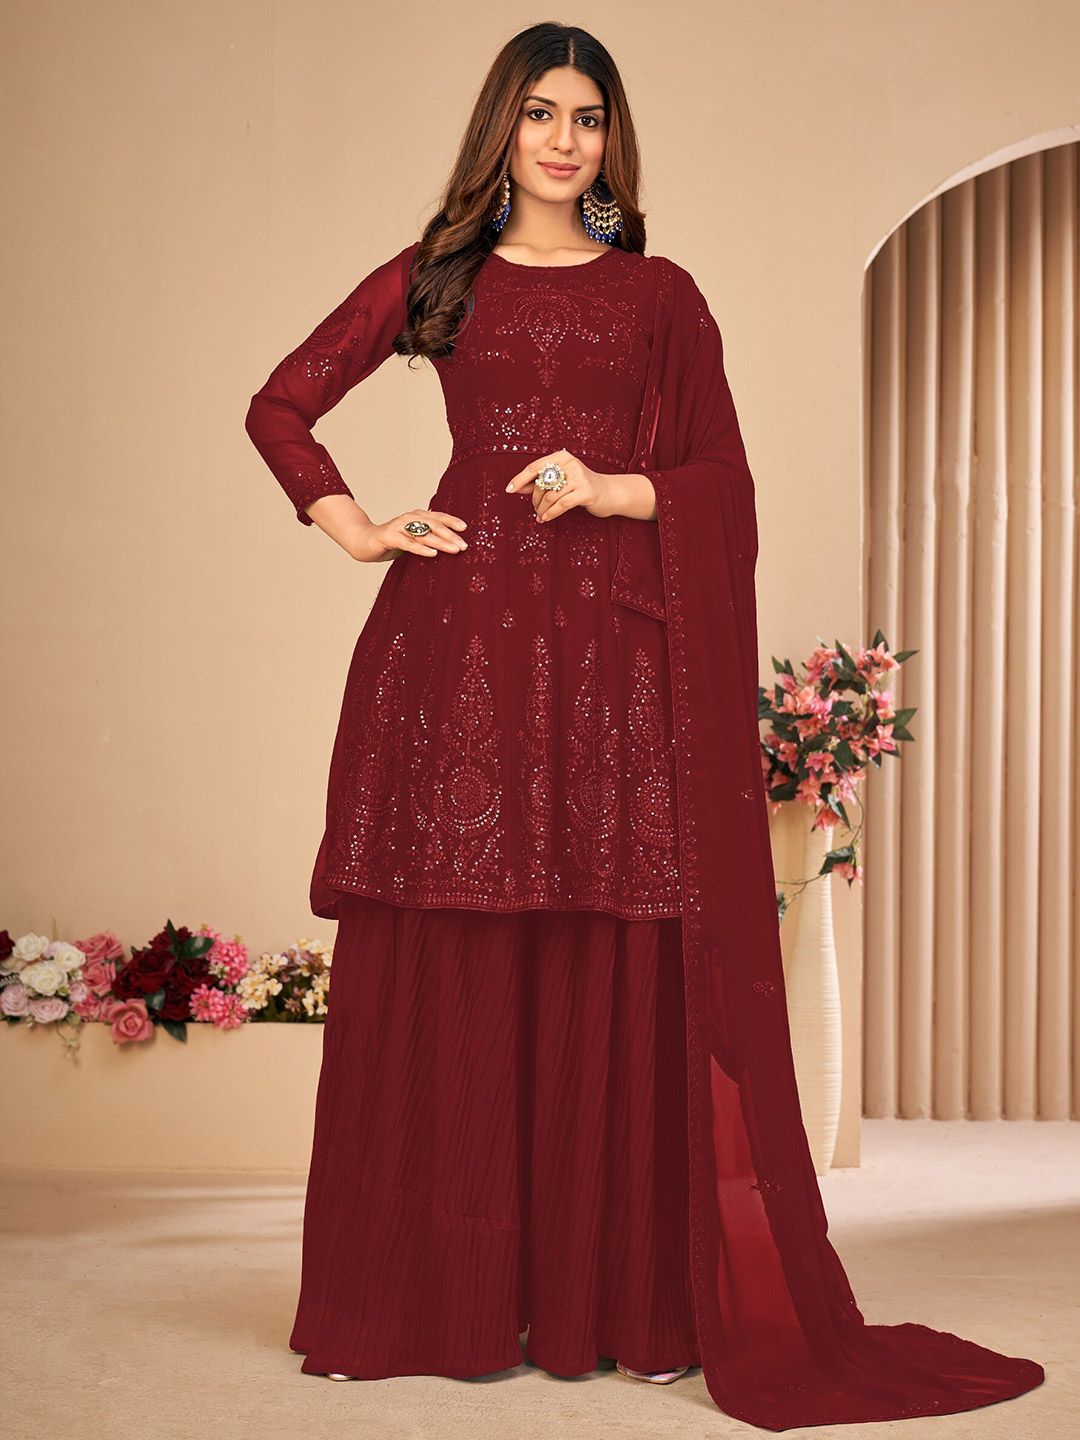 Divine International Trading Co Maroon Sequins Embroidered Unstitched Dress Material Price in India